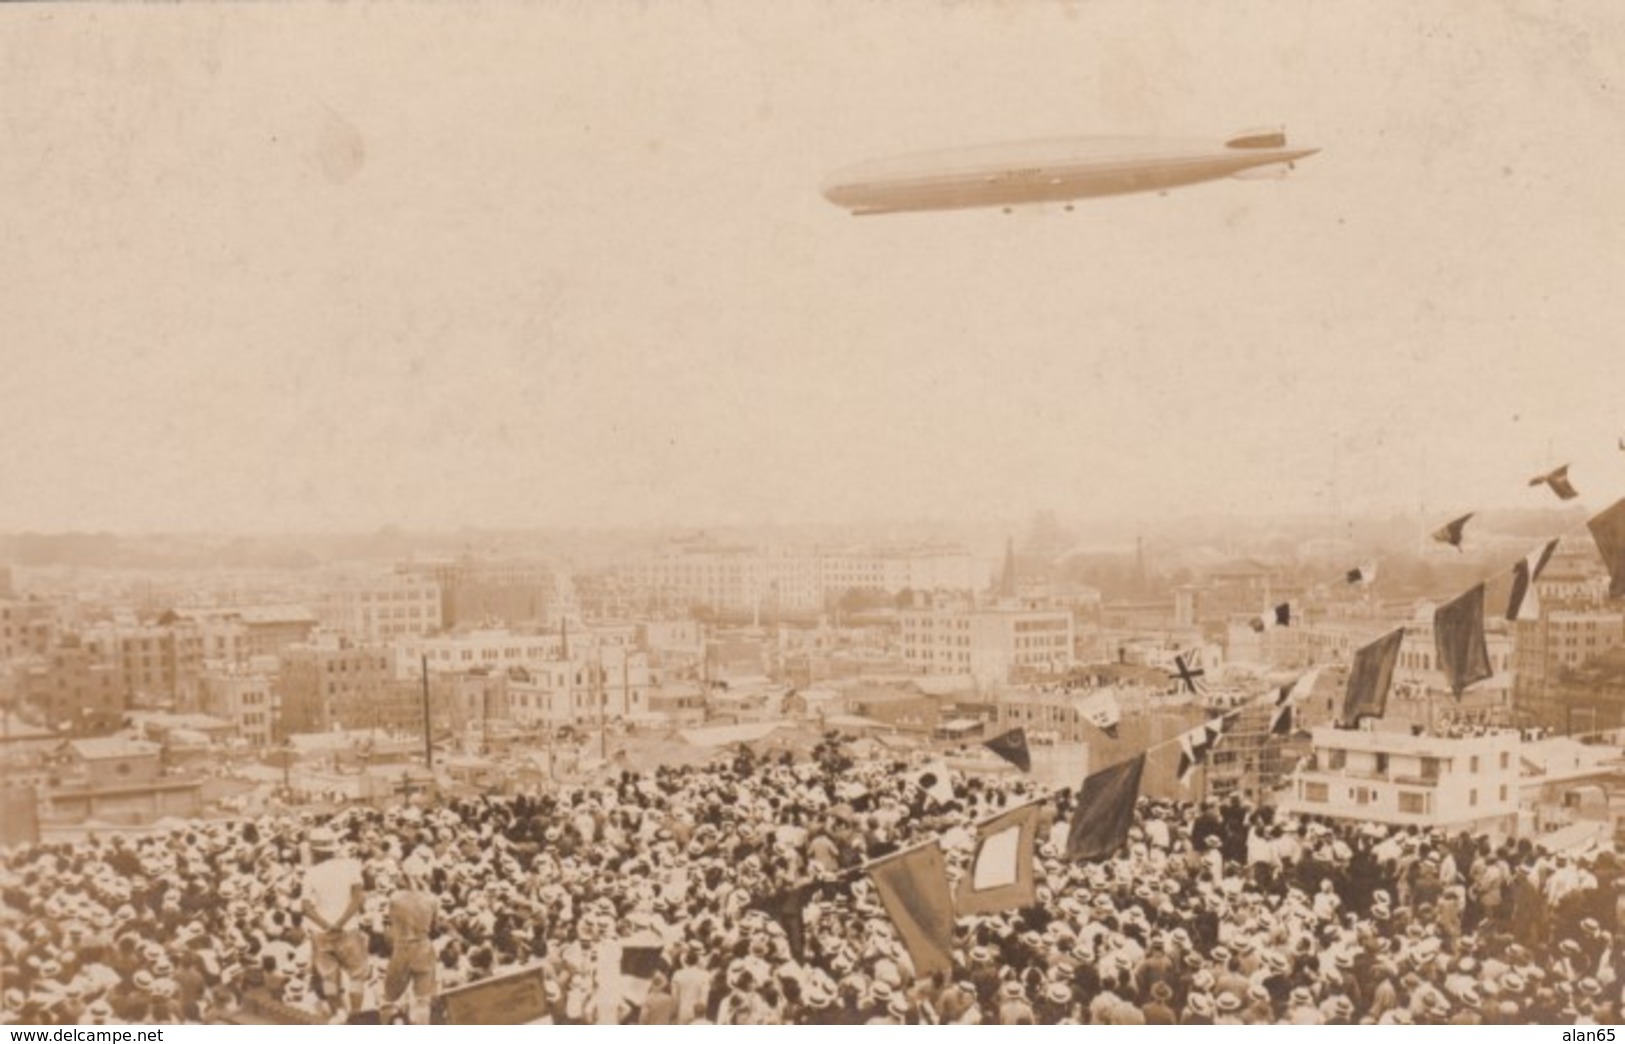 Air Ship Dirigible Over City And Near Hangar, Lot Of 4 Different C1920s/30s Vintage Photos - Aviation